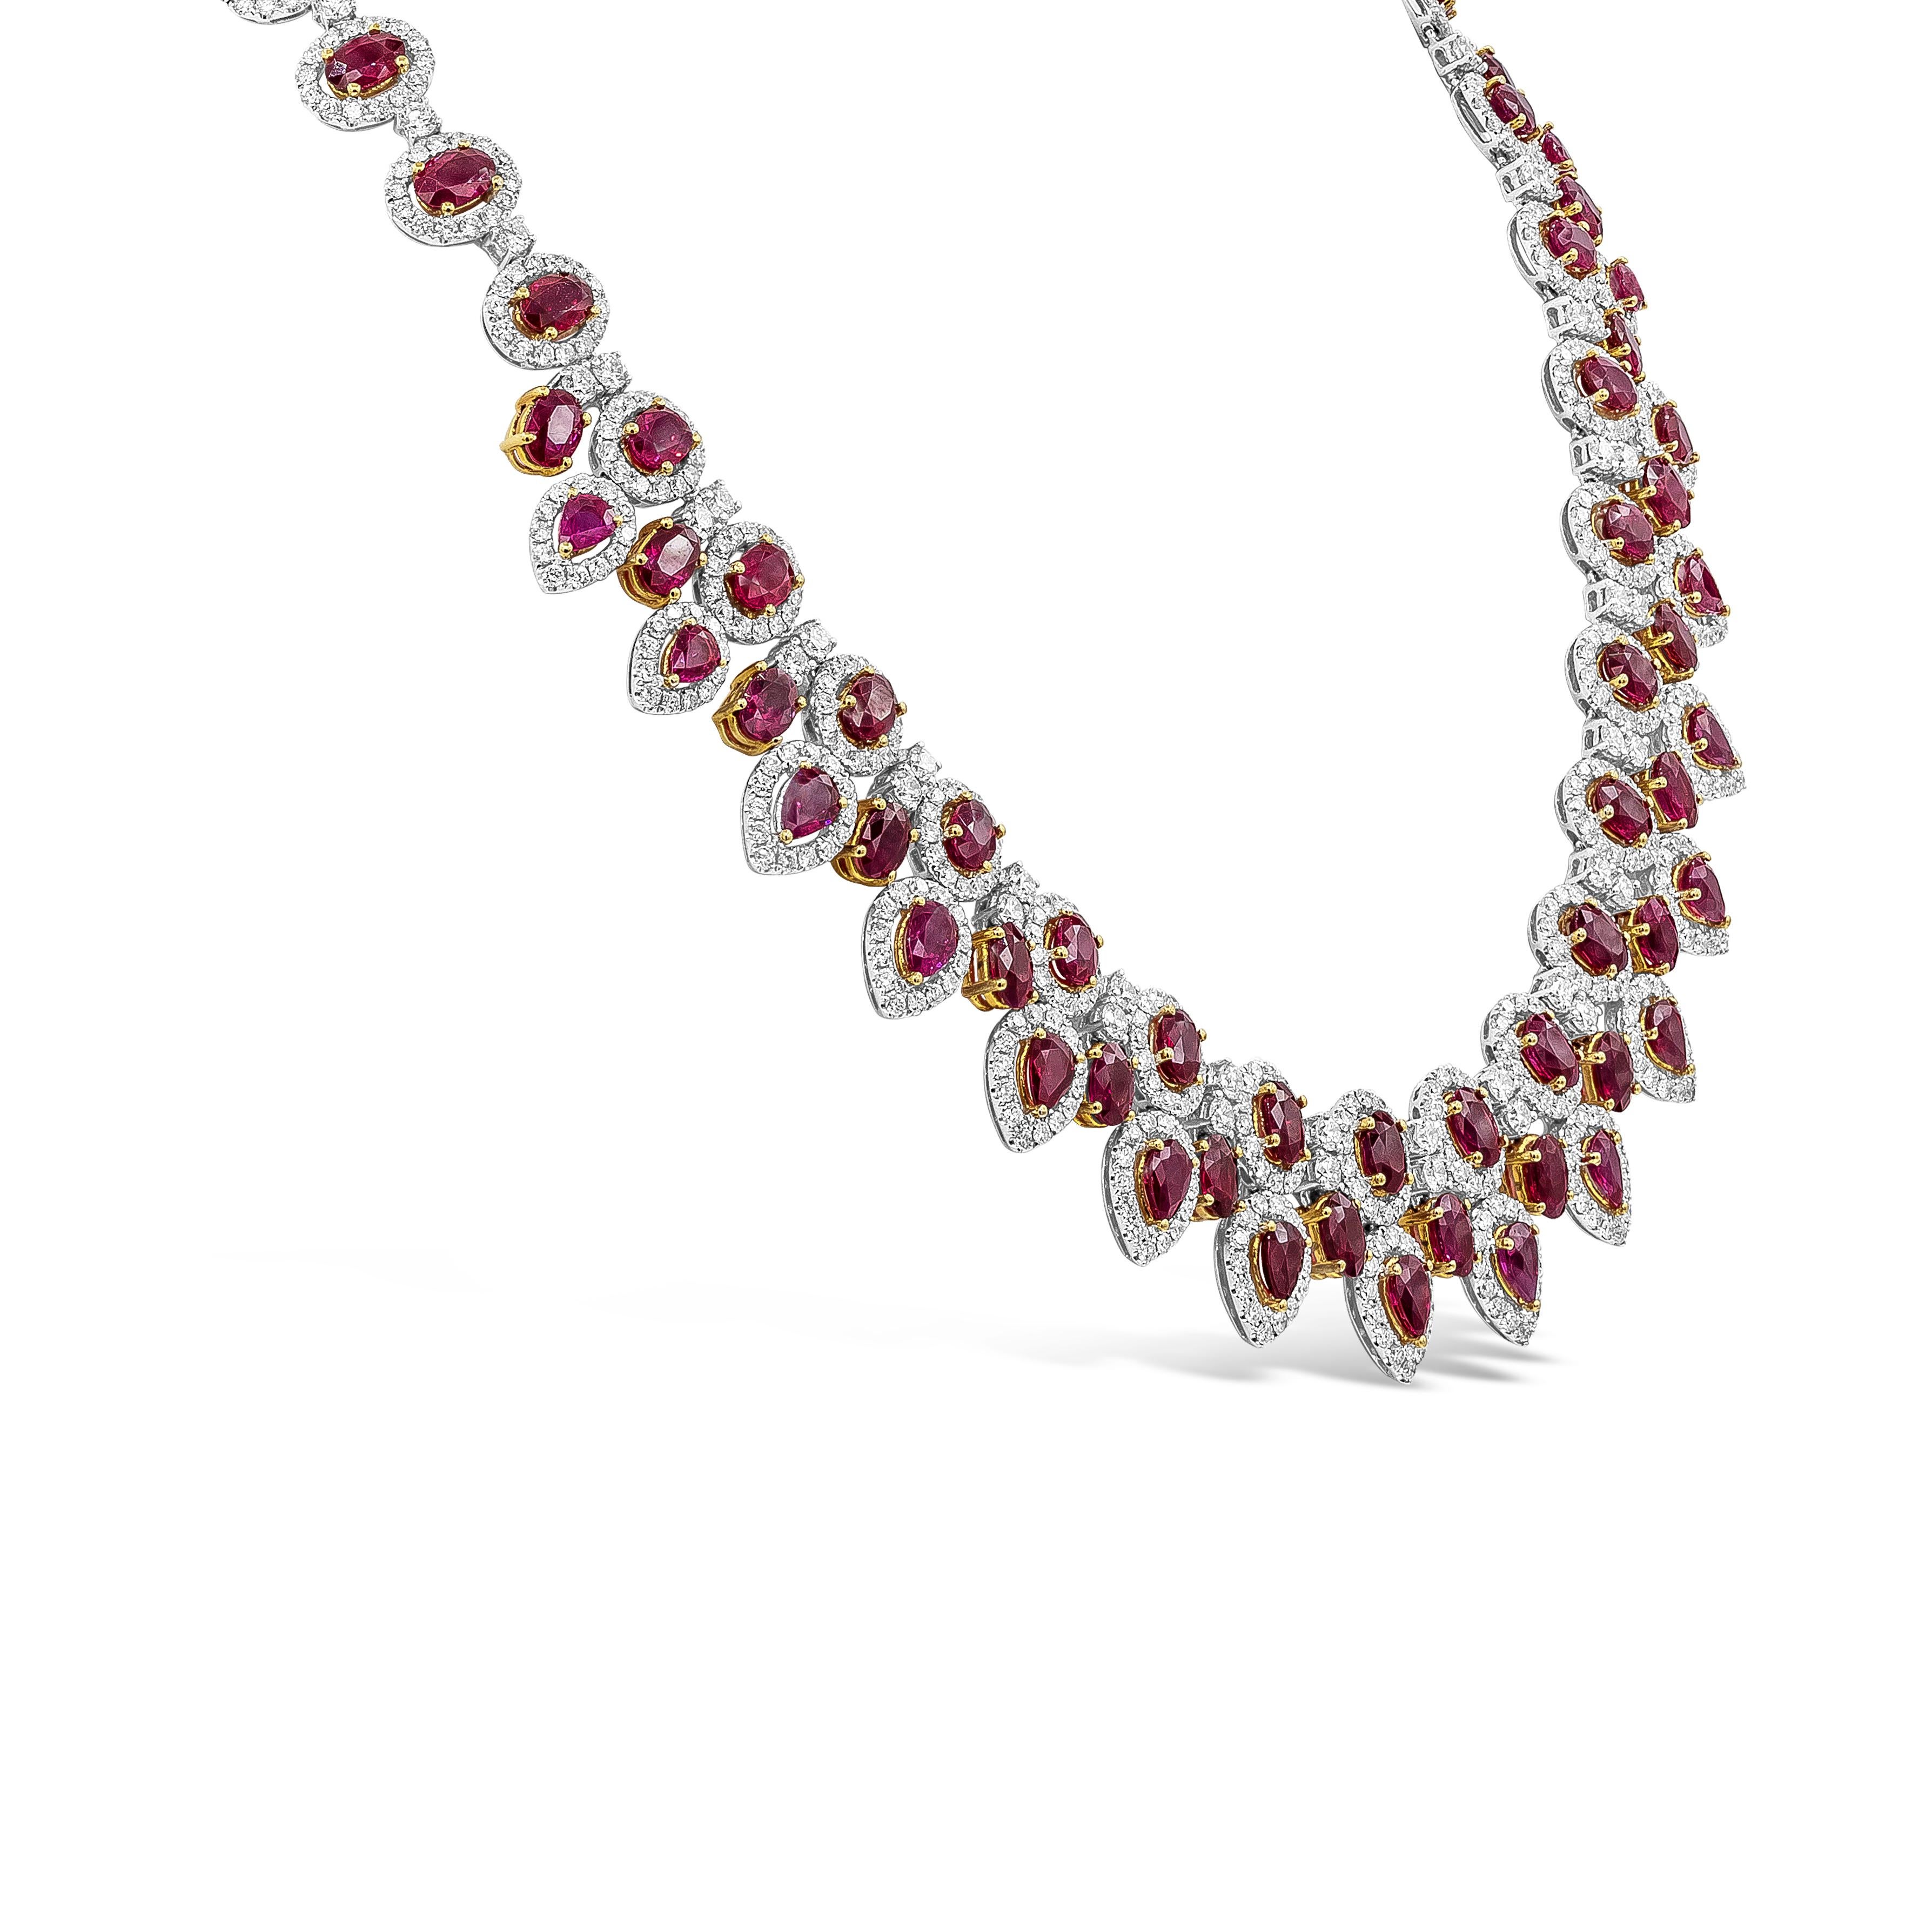 Elegant and well-crafted piece showcasing vibrant 72 pieces mixed oval cut and pear shape rubies set in a 18K yellow gold floating design weighing 38.92 carats total. Each ruby is accented with brilliant round halo diamonds weighing 14.30 carats